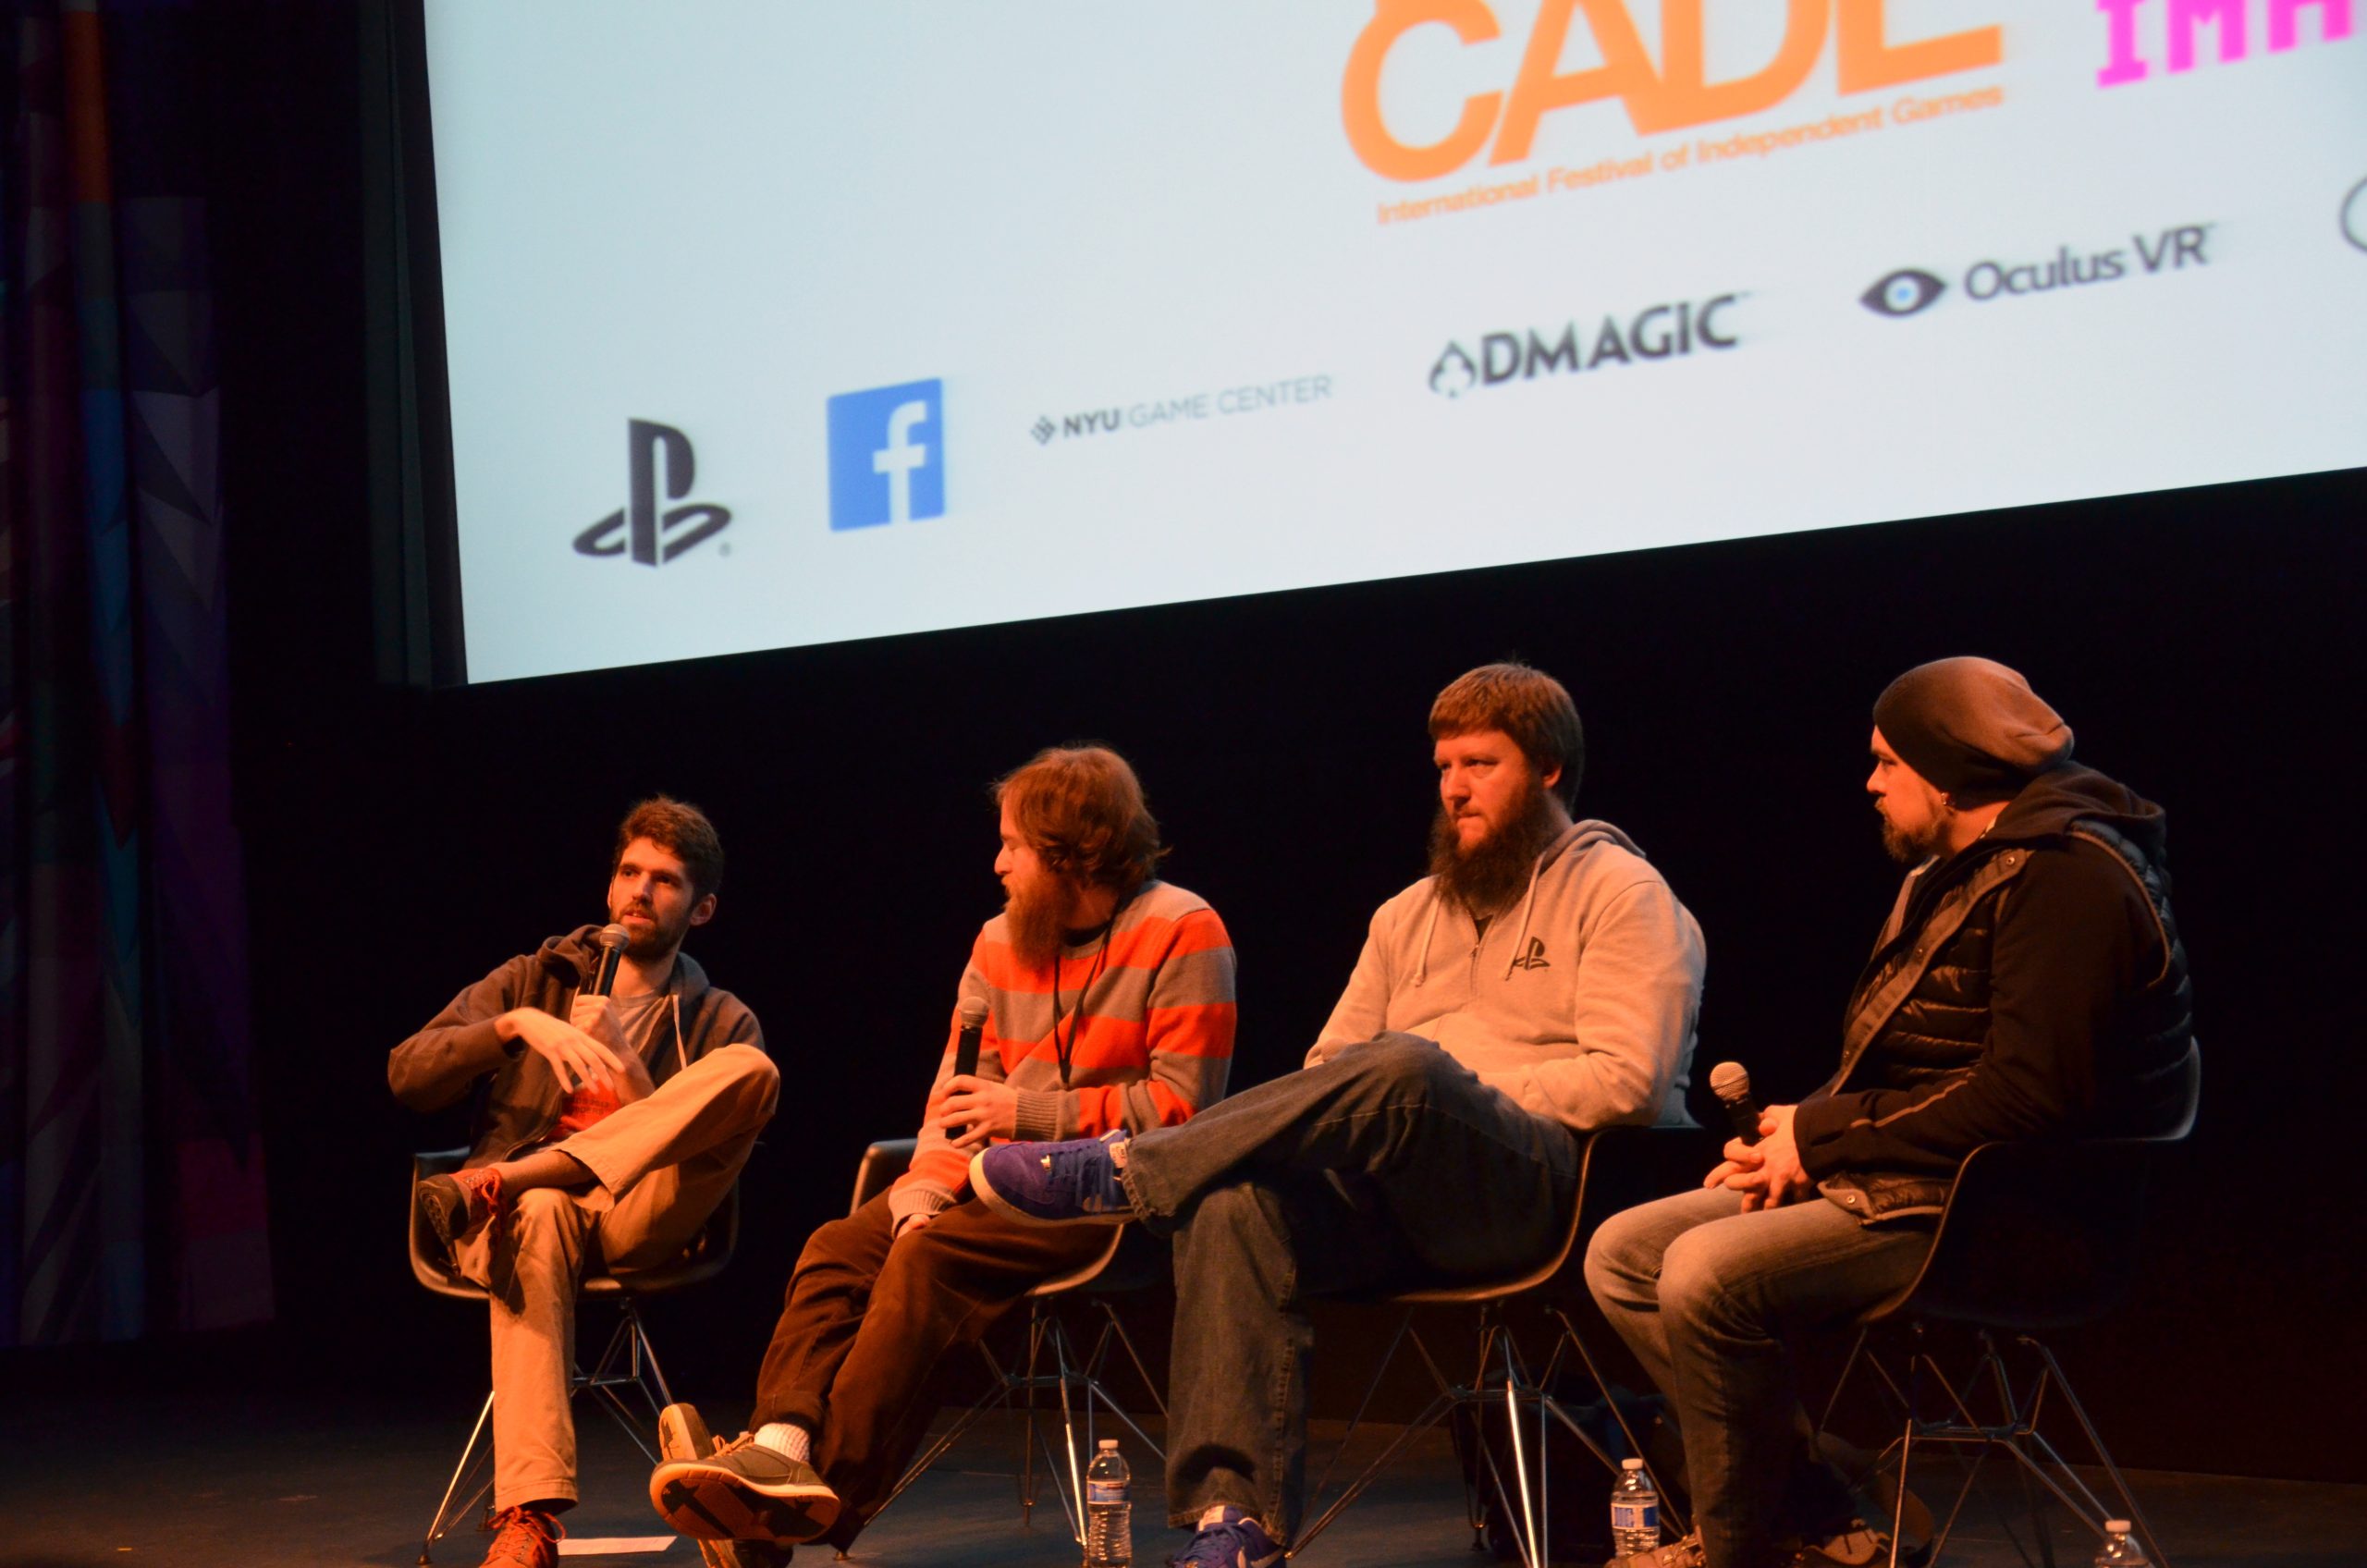 Sony at IndieCade East: Highlighting Galak-Z, Sportfriends and One Year with Indies